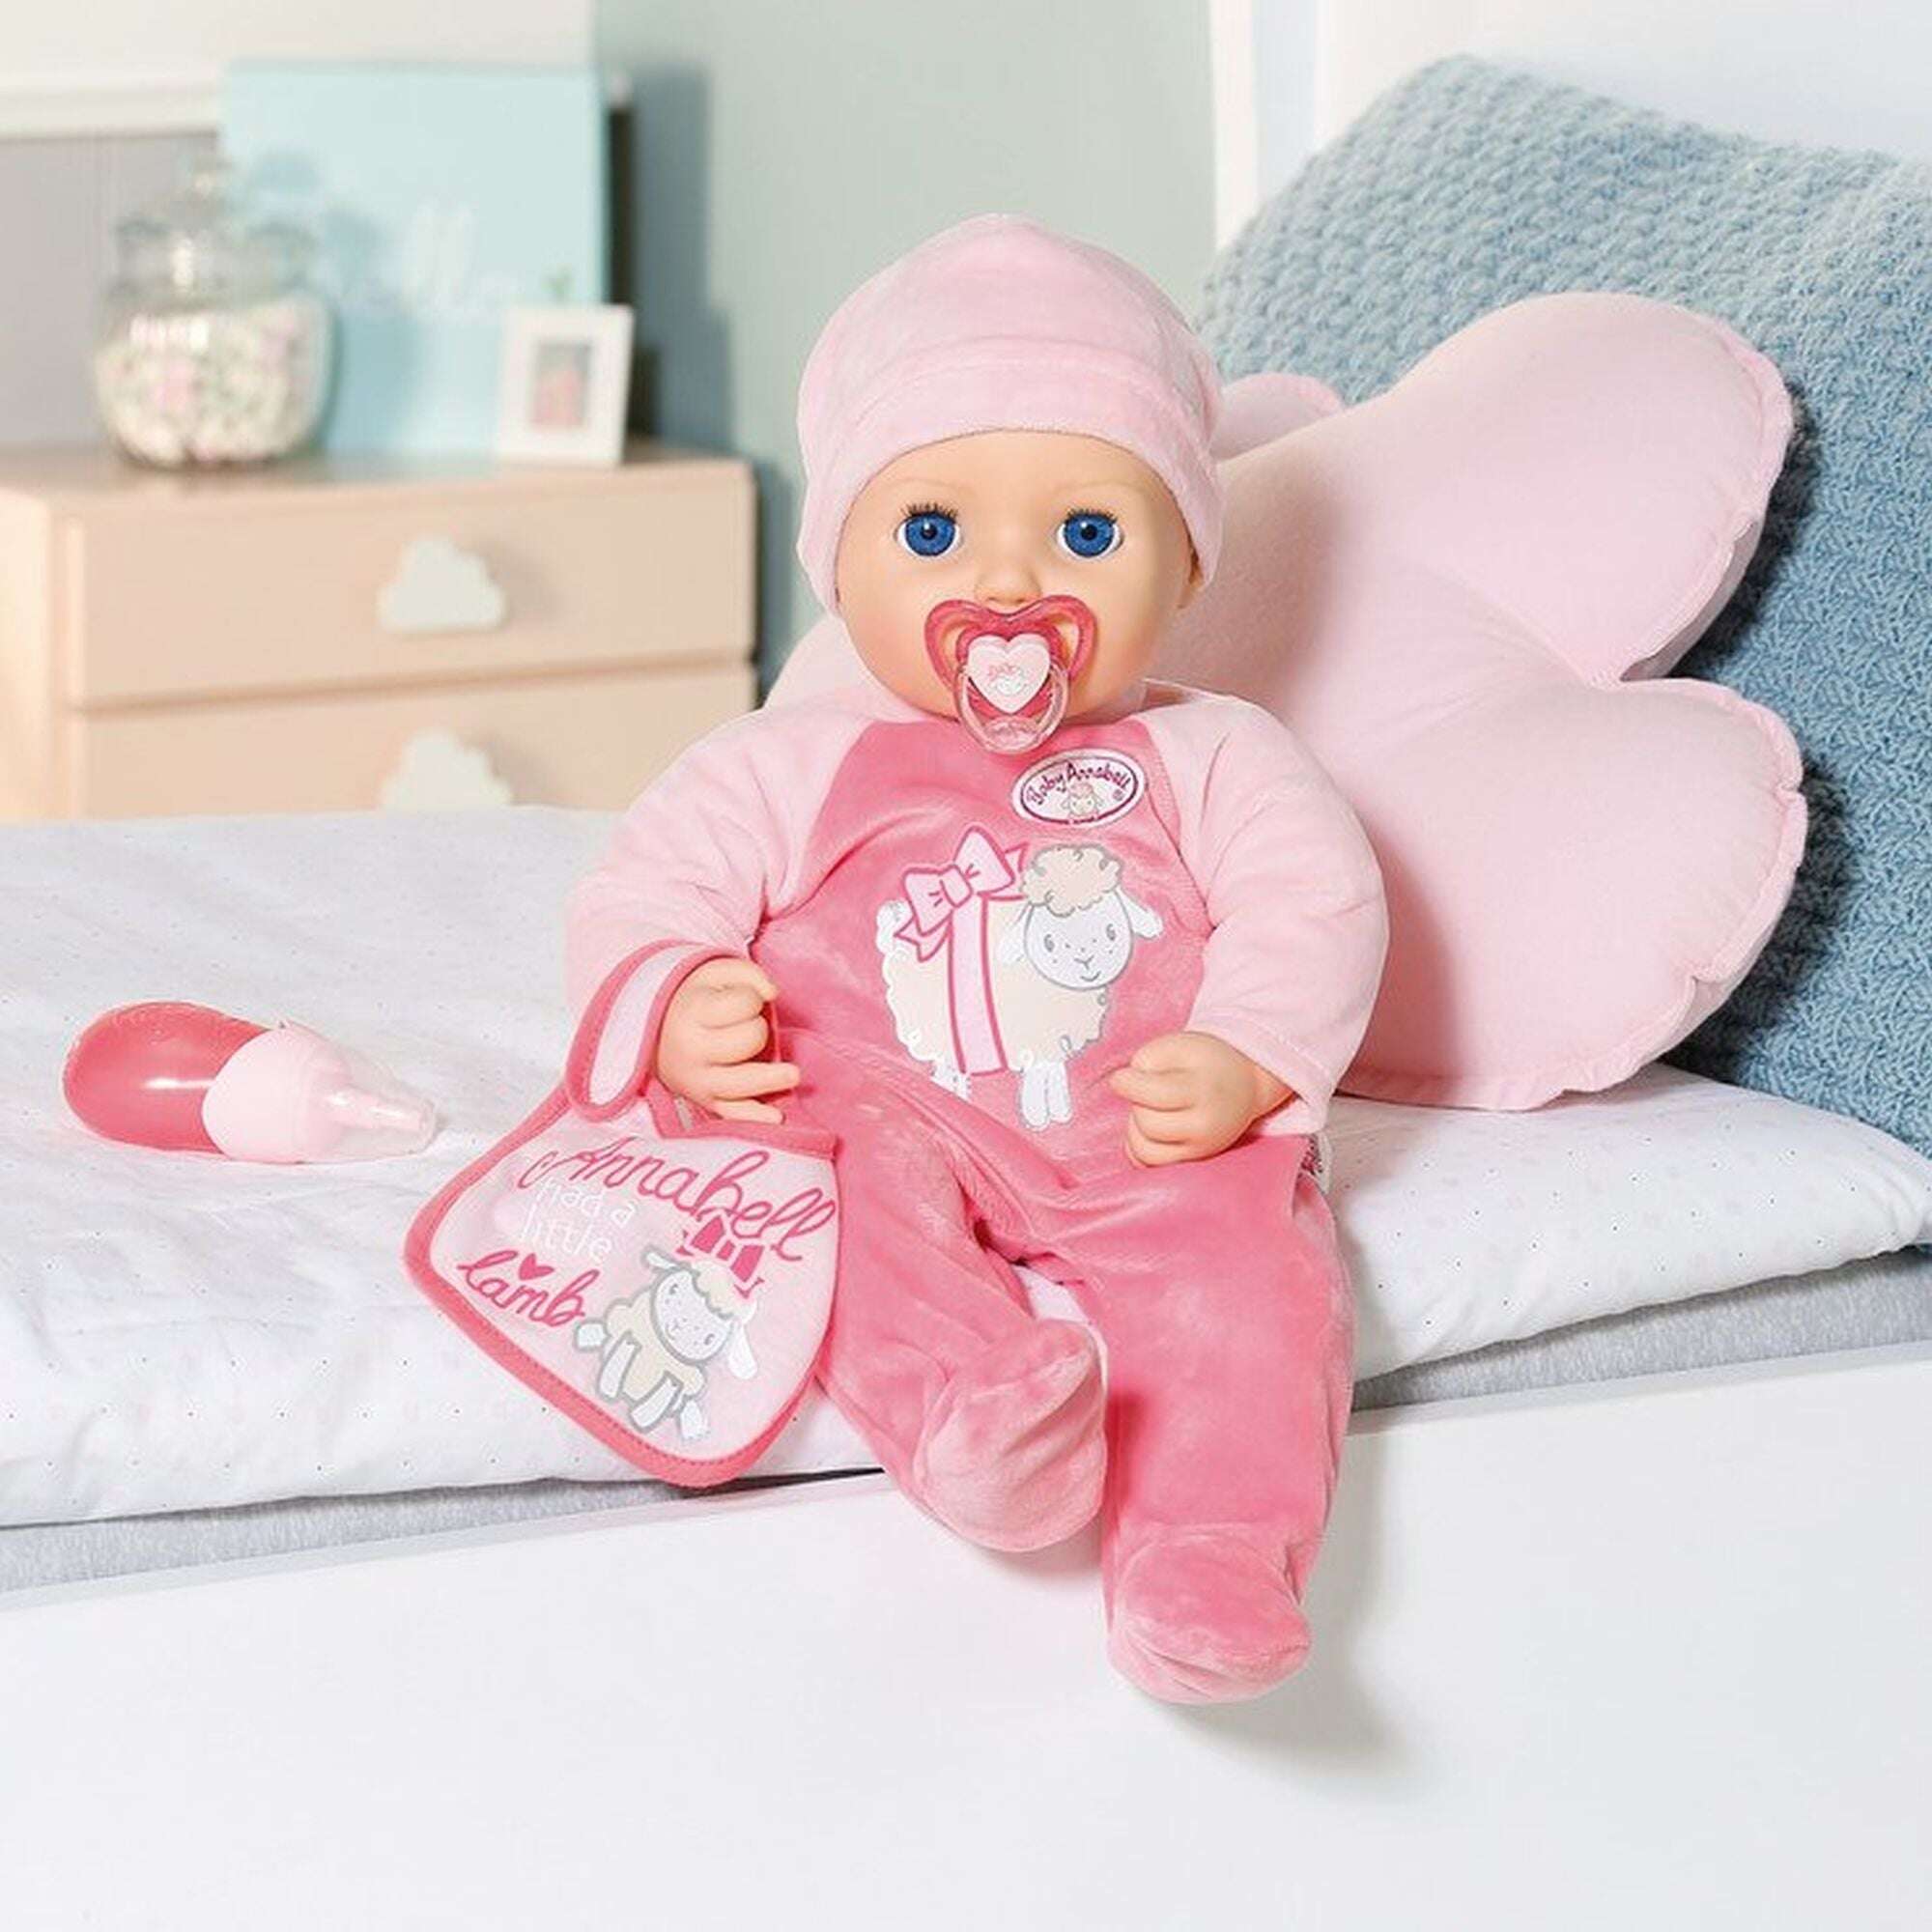 Baby annabell - papusa interactiva corp moale, 43 cm